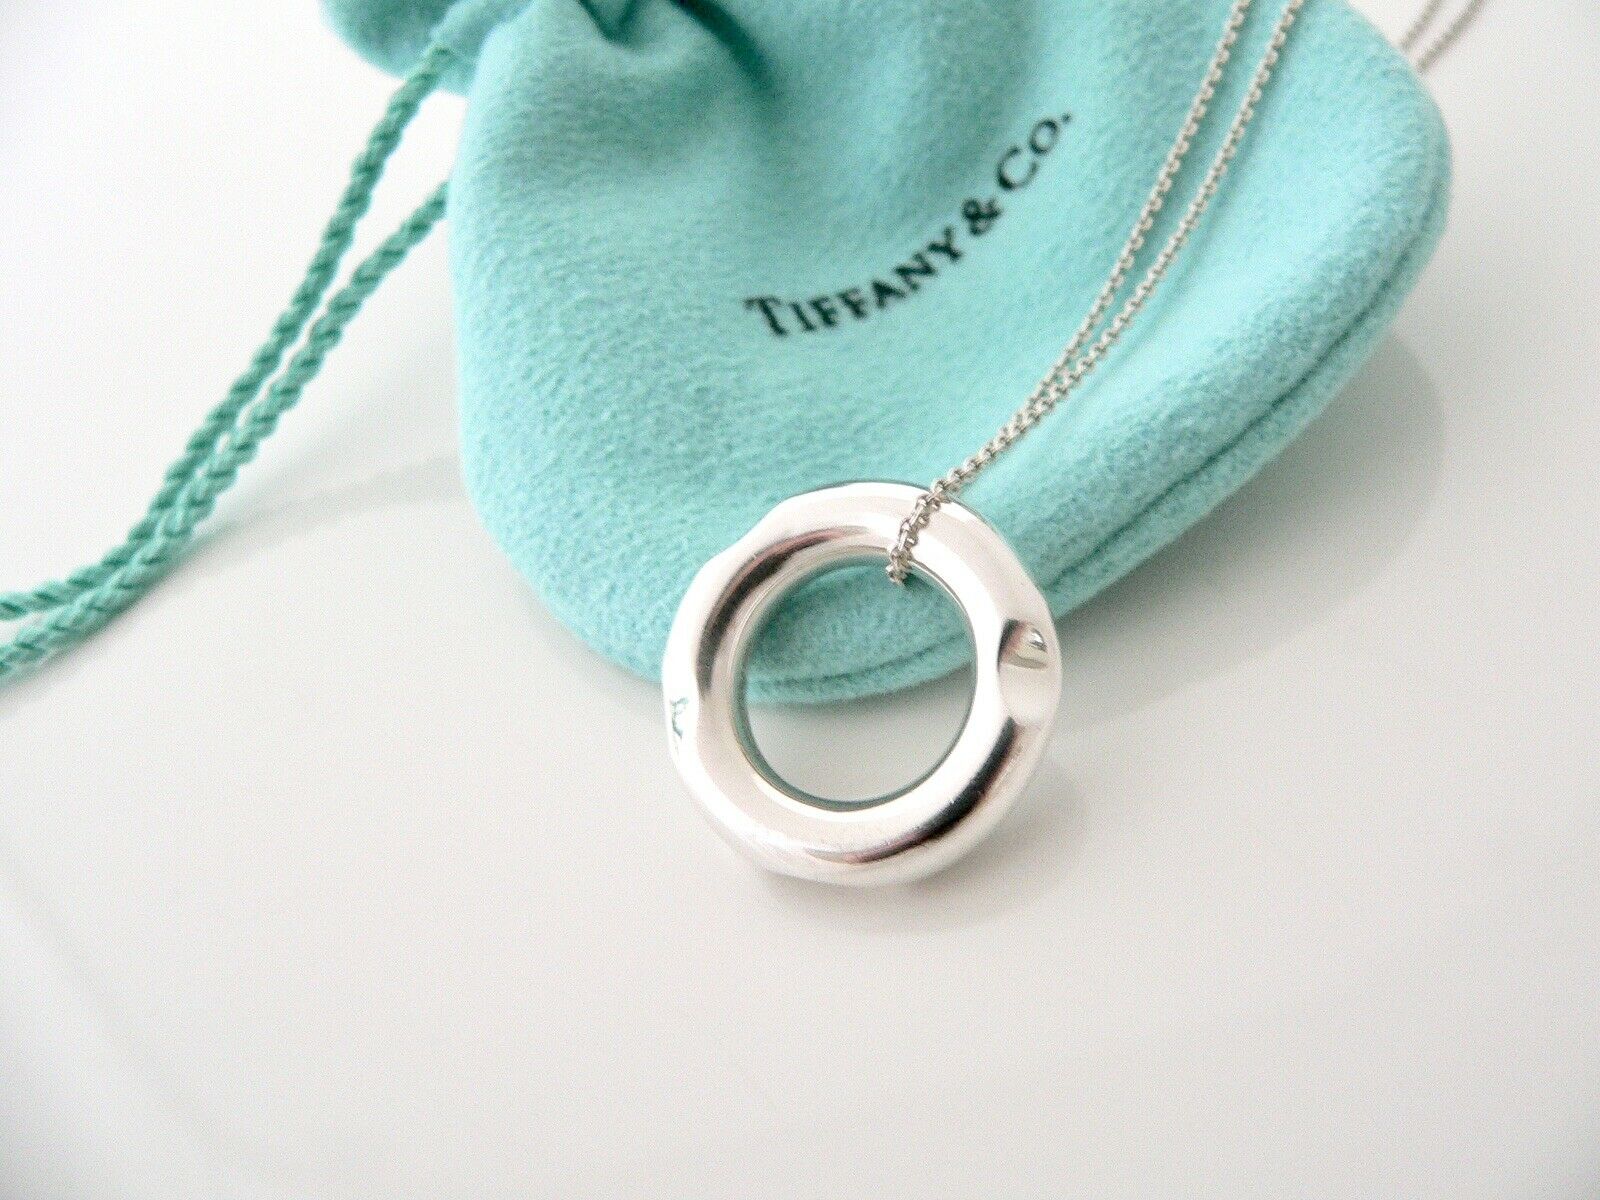 Tiffany & Co Gehry Tube Necklace Pendant Charm Chain Silver Gift Pouch Love Art